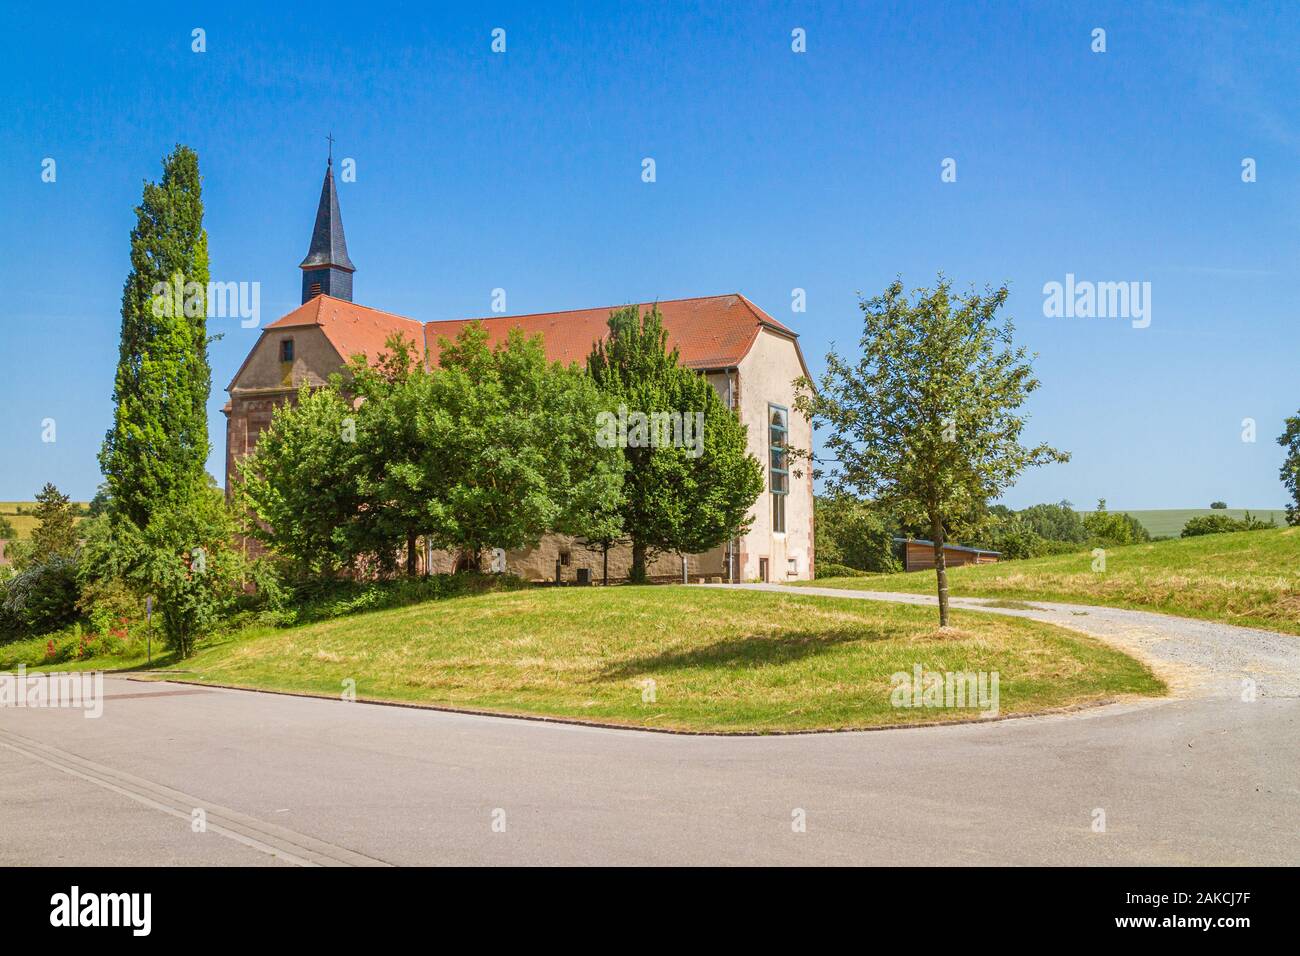 Full view of the Monastery church Lobenfeld, an old church building in Baden-Württemberg, Germany in summer sunshine Stock Photo